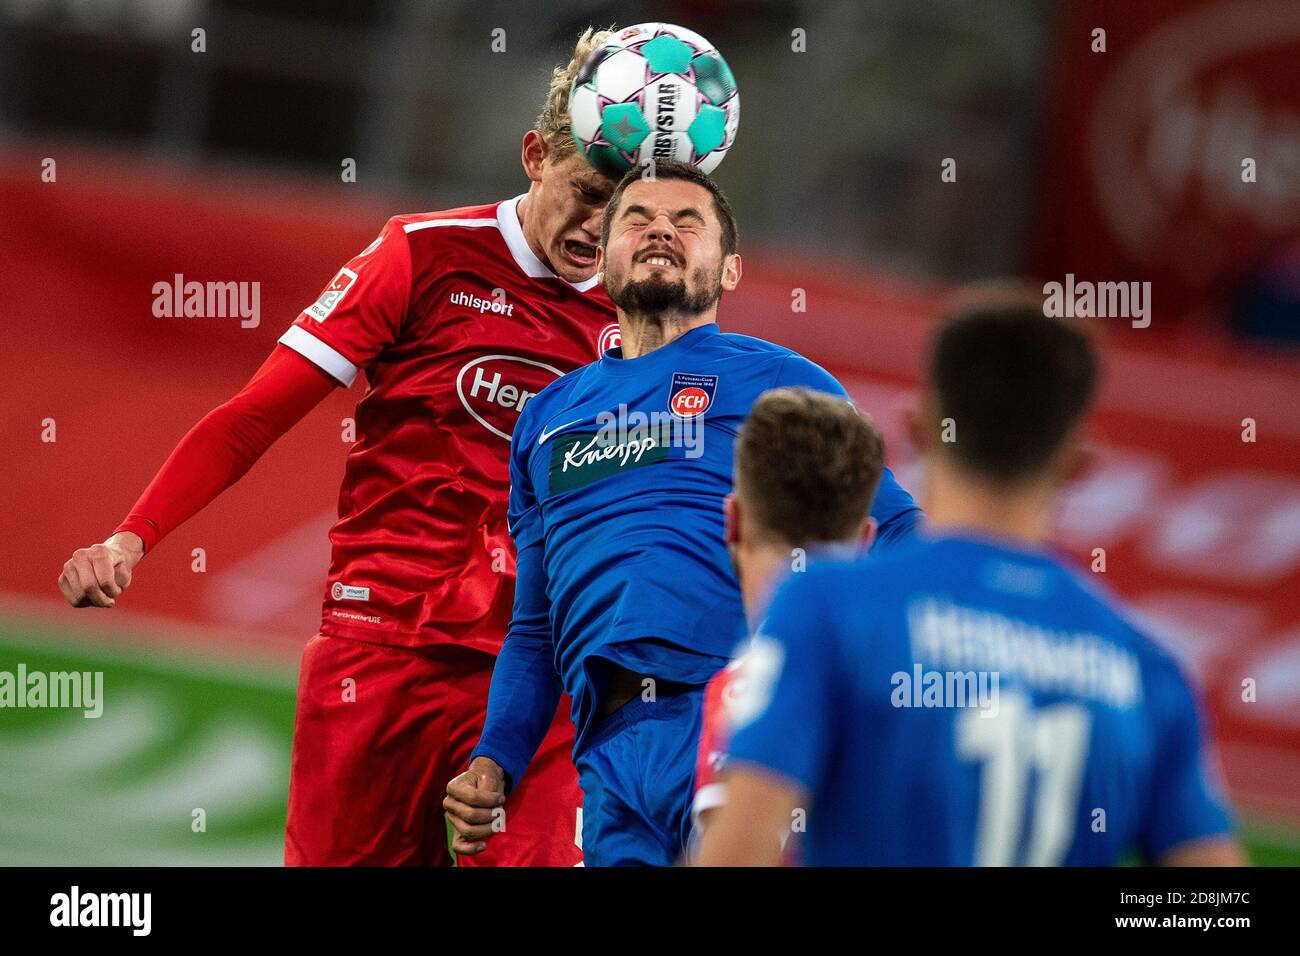 Duesseldorf, Germany. 30th Oct, 2020. Football: 2nd Bundesliga, Fortuna Düsseldorf - 1st FC Heidenheim, 6th matchday in the Merkur arena. Düsseldorf's Christoph Klarer (l) and Heidenheim's Marnon Busch fight for the ball. Credit: Marius Becker/dpa - IMPORTANT NOTE: In accordance with the regulations of the DFL Deutsche Fußball Liga and the DFB Deutscher Fußball-Bund, it is prohibited to exploit or have exploited in the stadium and/or from the game taken photographs in the form of sequence images and/or video-like photo series./dpa/Alamy Live News Stock Photo